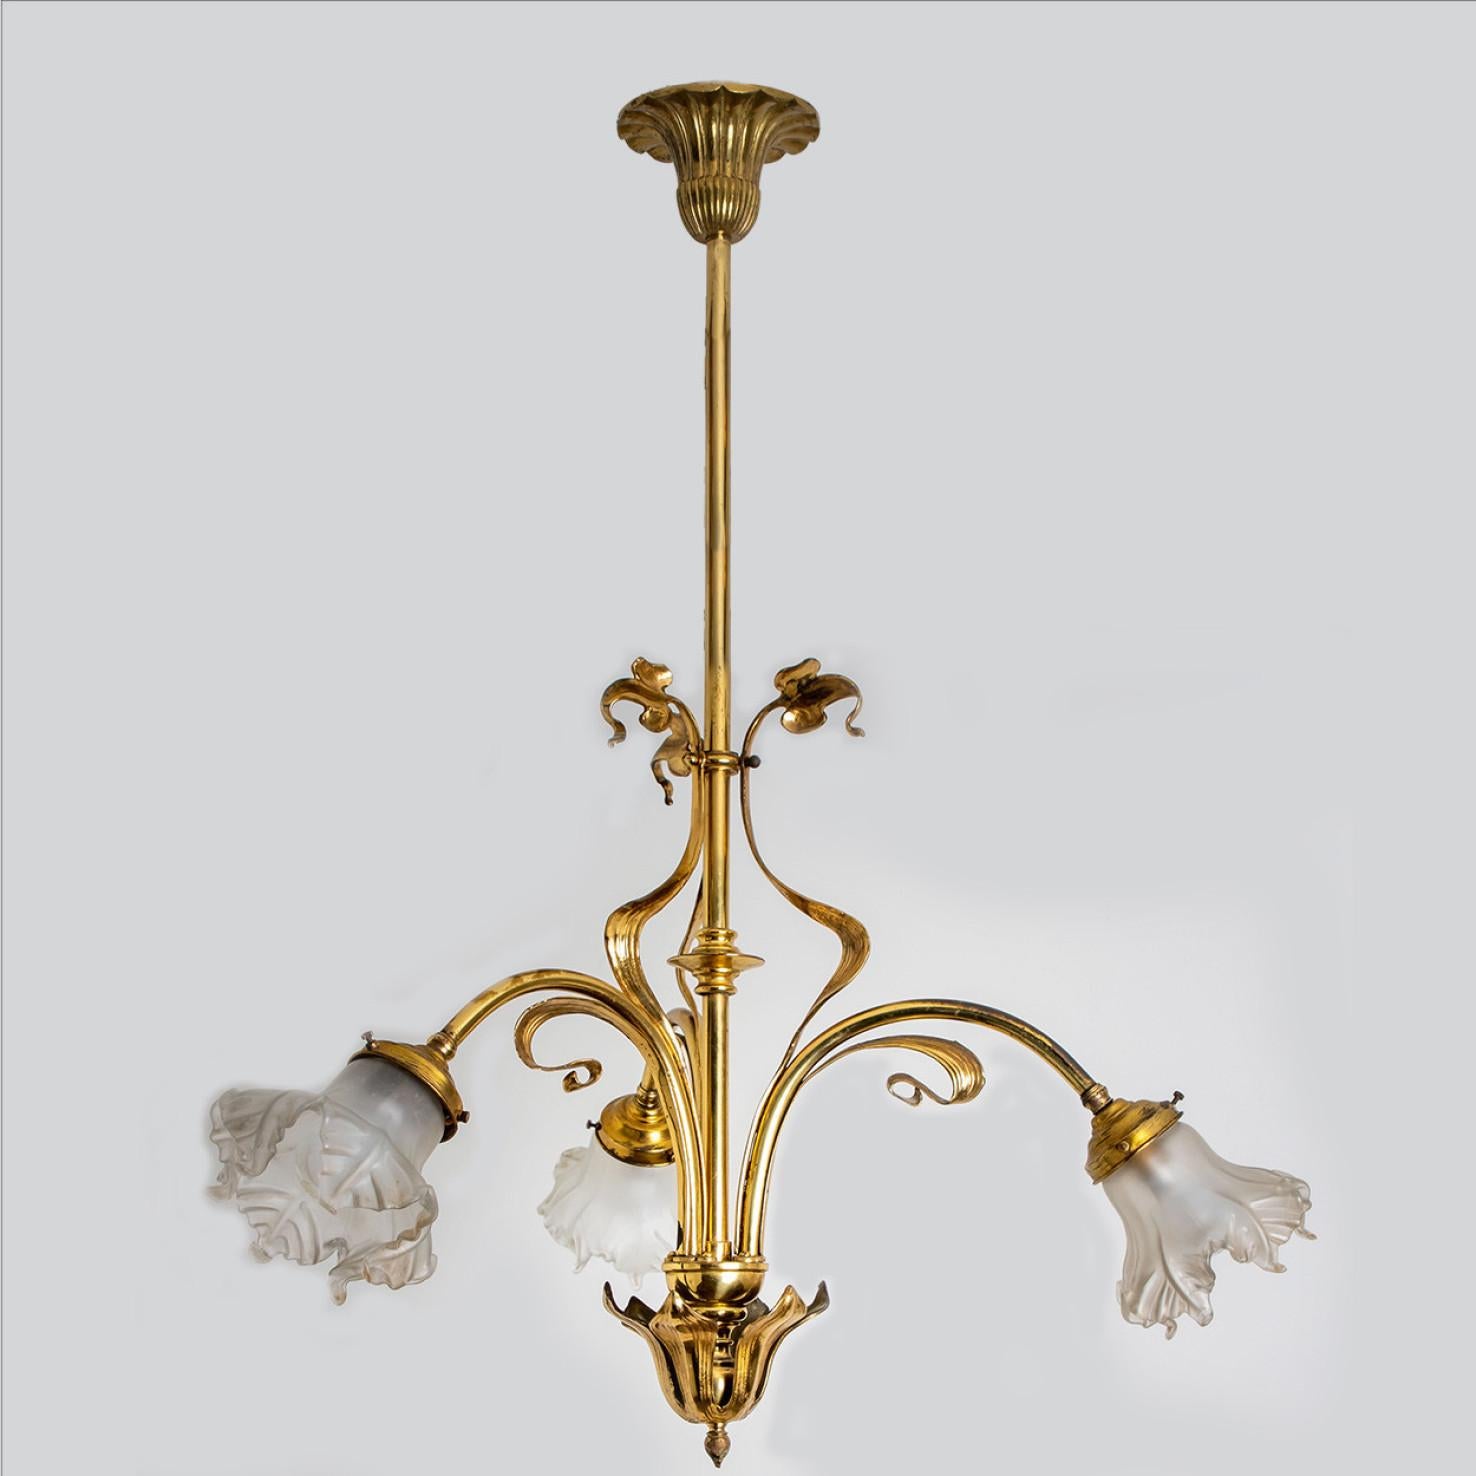 Exceptional and elegant  bronze and glass chandelier, Art Nouveau period, France, circa 1890.

With 3 wonderful glass flowers. With 3 french standard bayonet fitting.

A statement piece, excellent craftsmanship from the 20th century.

We can